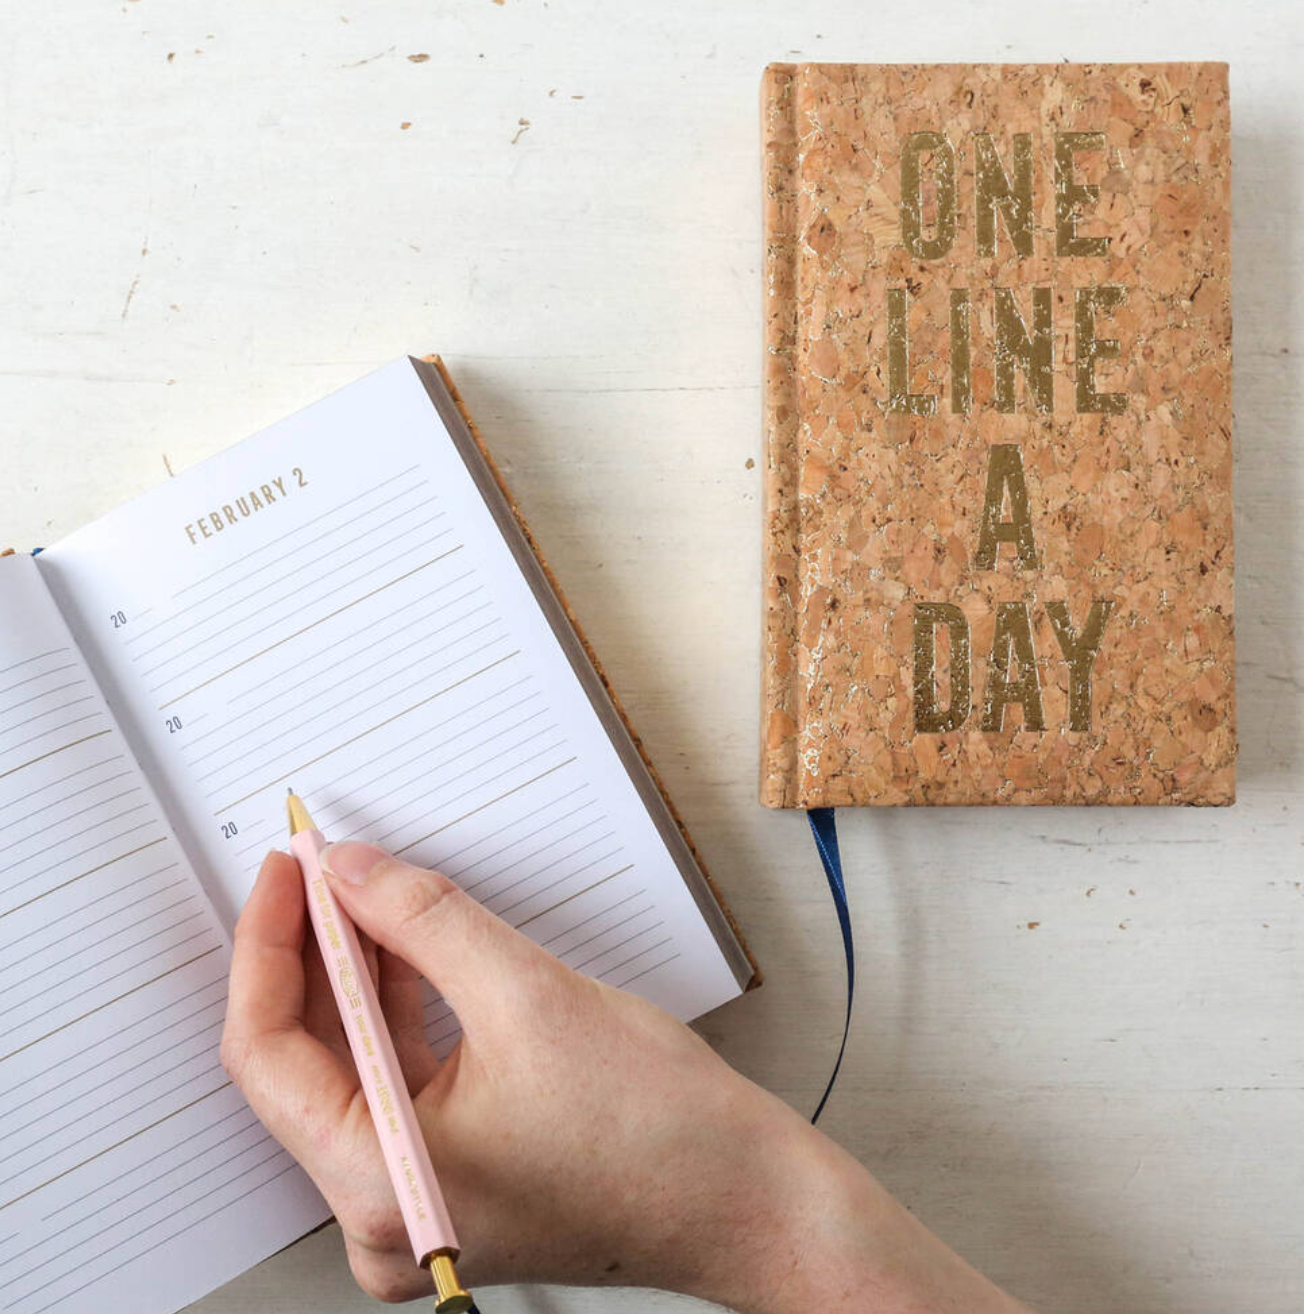 Cork One Line a Day: A Five-Year Memory Book - Taylorson